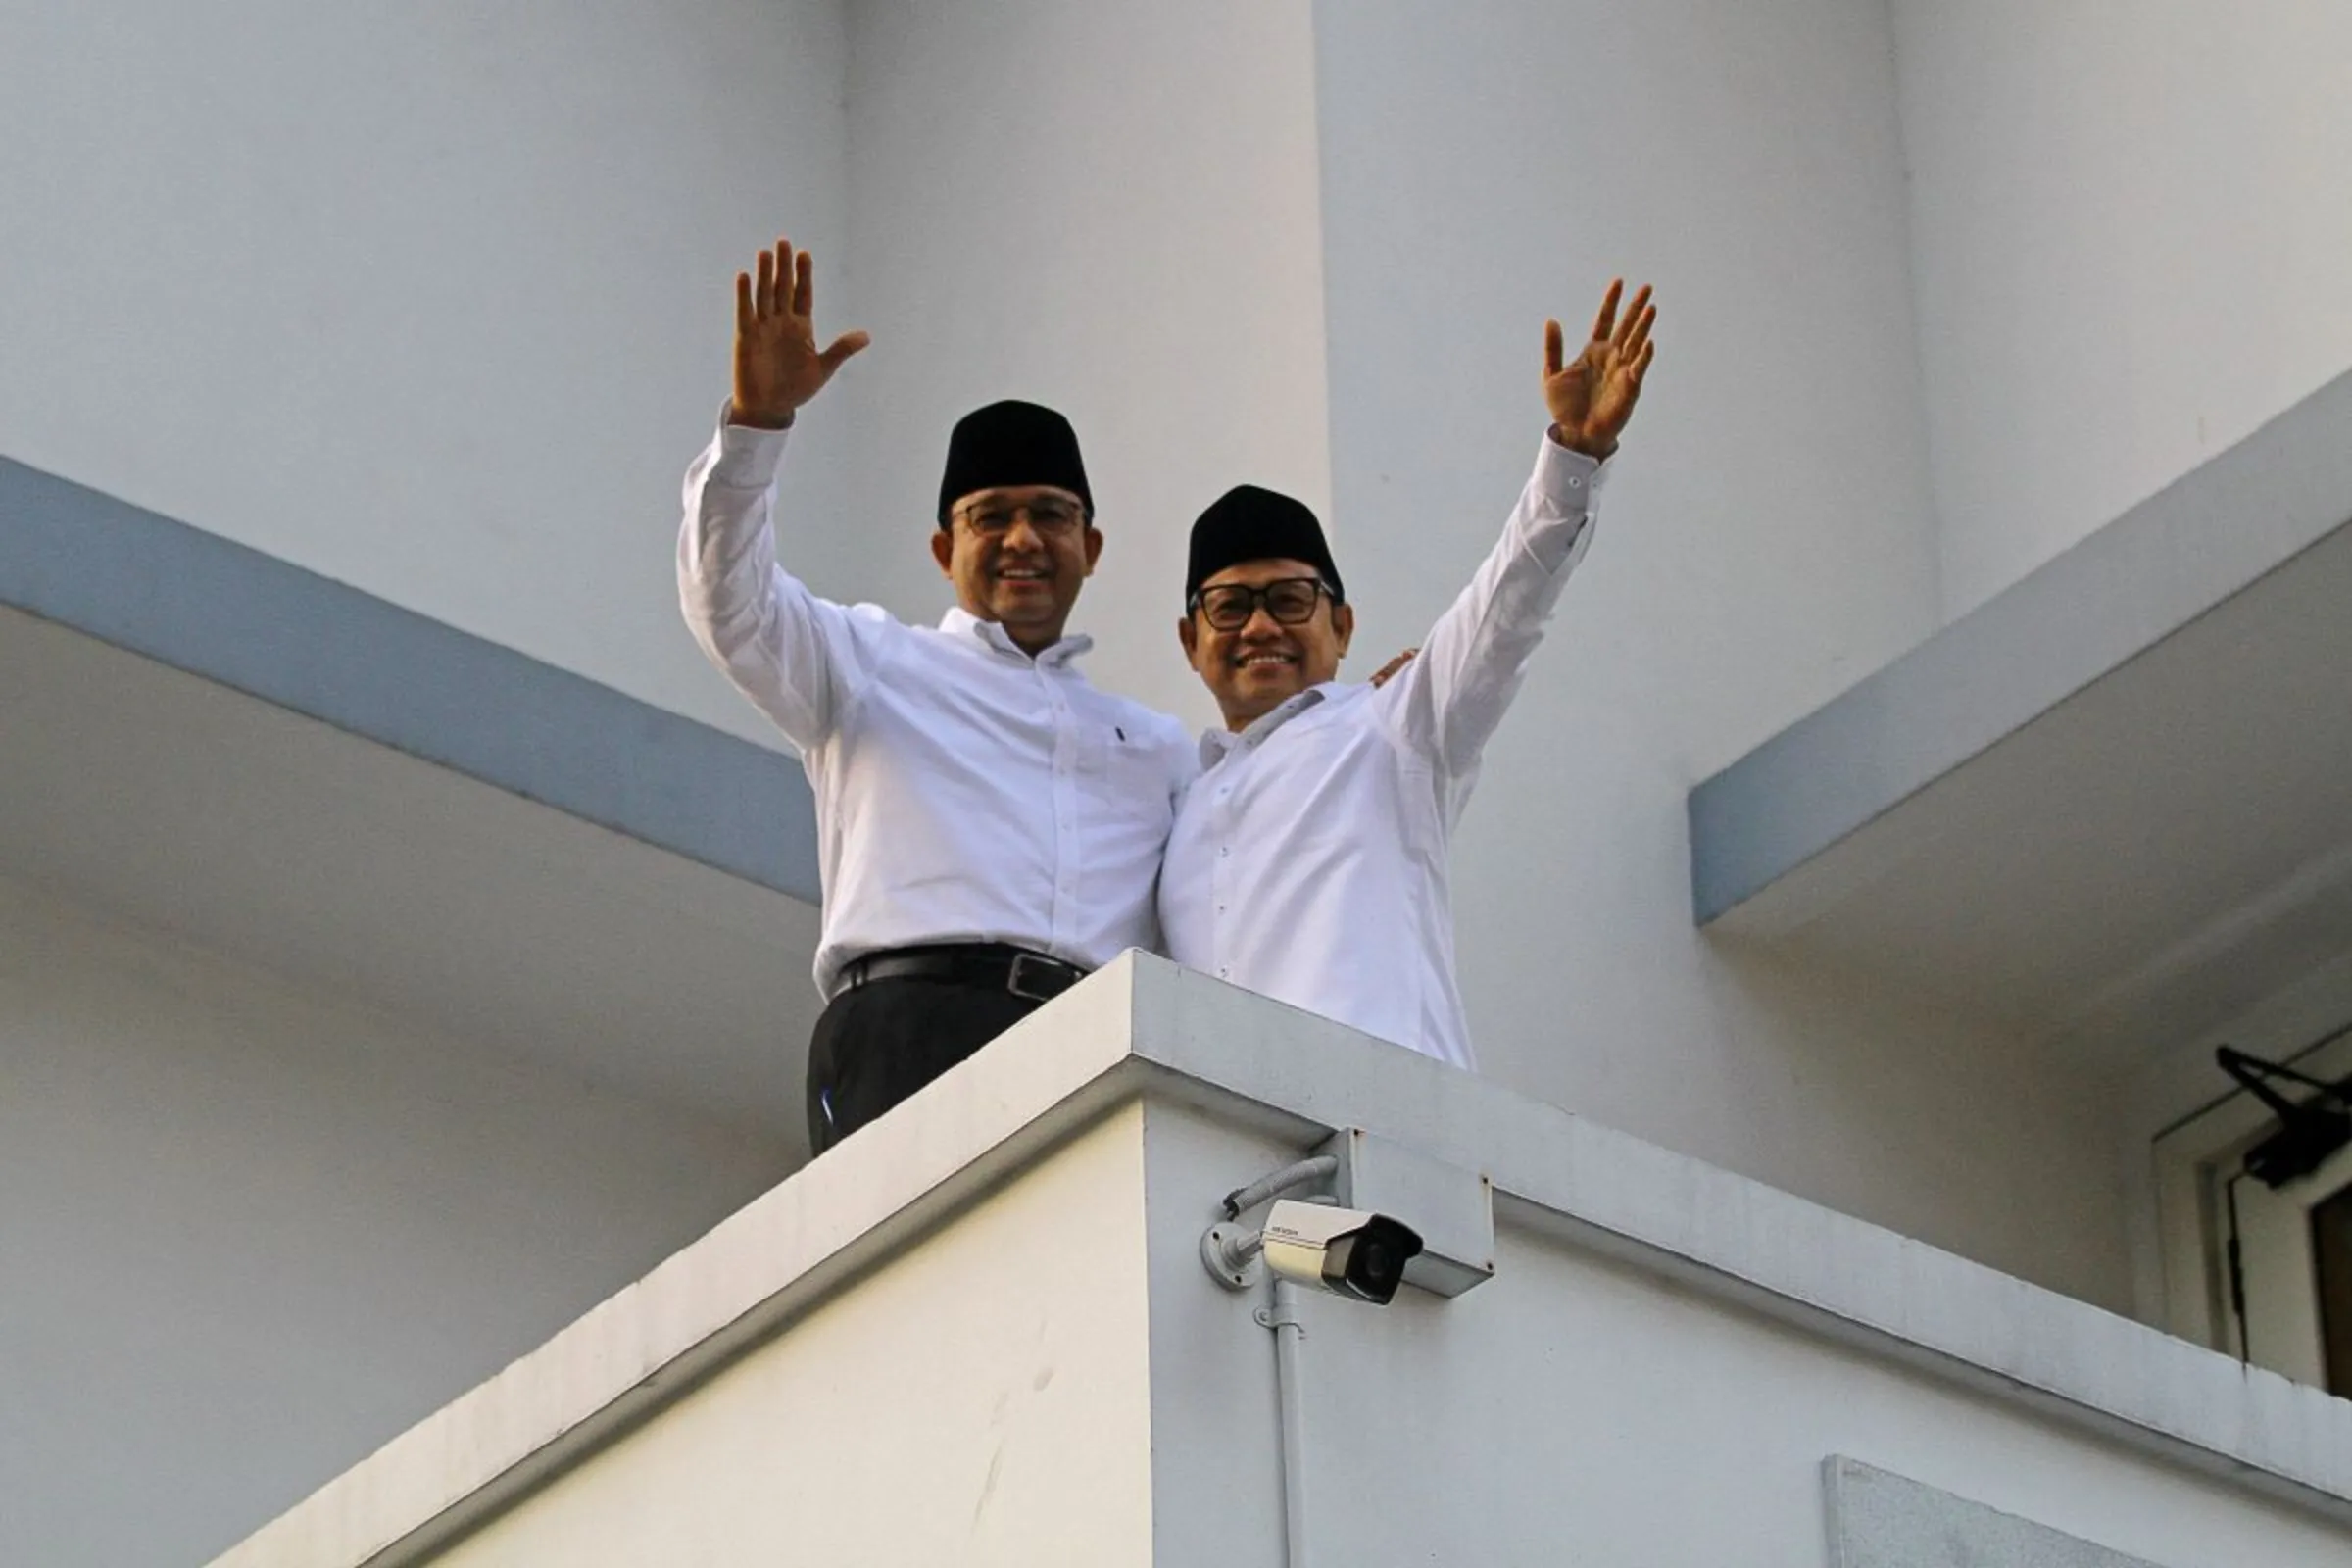 Anies Baswedan, former Jakarta Governor who will run as the presidential candidate for the 2024 presidential election, poses for photographs with his running mate Muhaimin Iskandar, who is the chairman of National Awakening Party (PKB), in Surabaya, East Java province, Indonesia, September 2, 2023